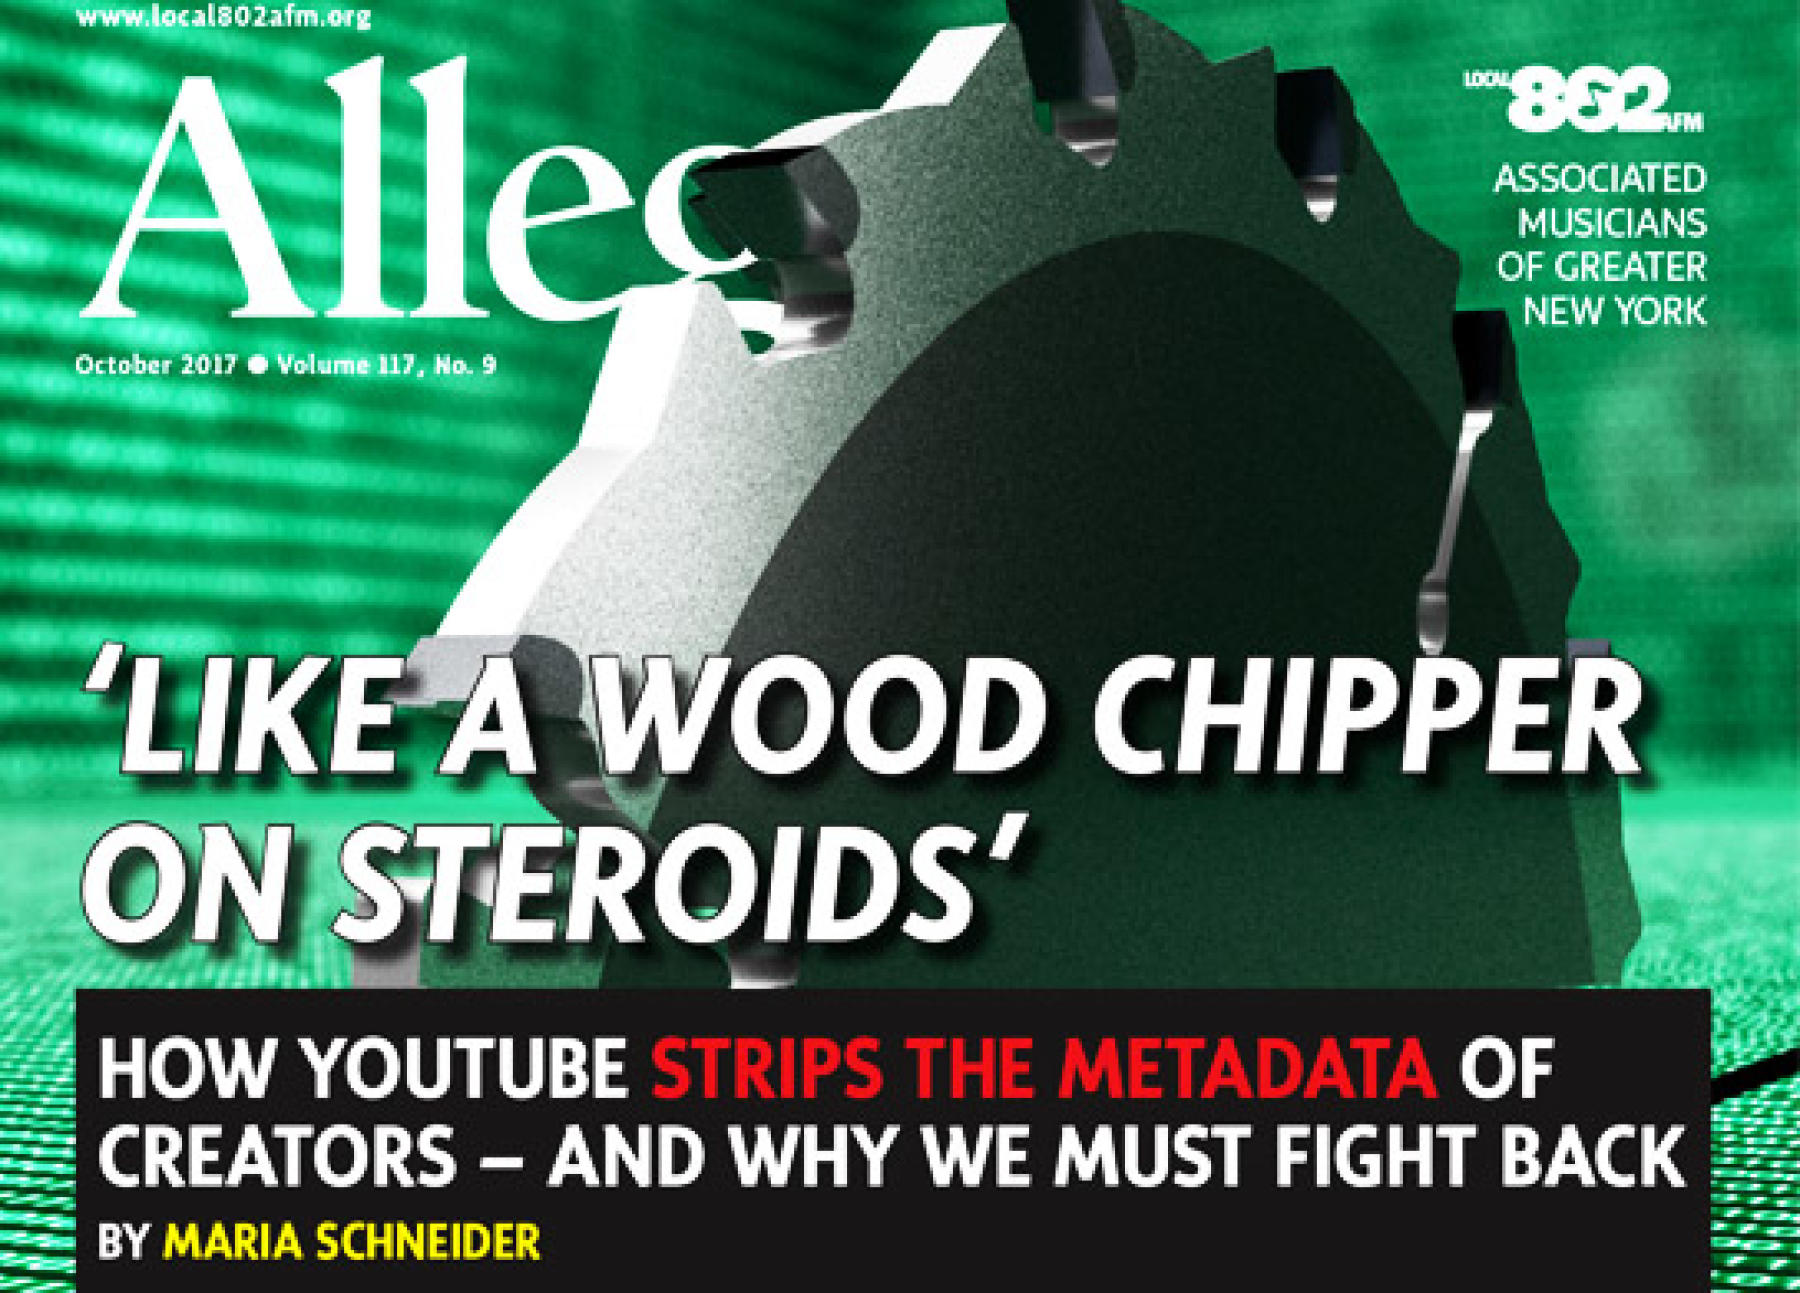 Like a Wood Chipper on Steroids - How YouTube Strips the Metadata of Creators